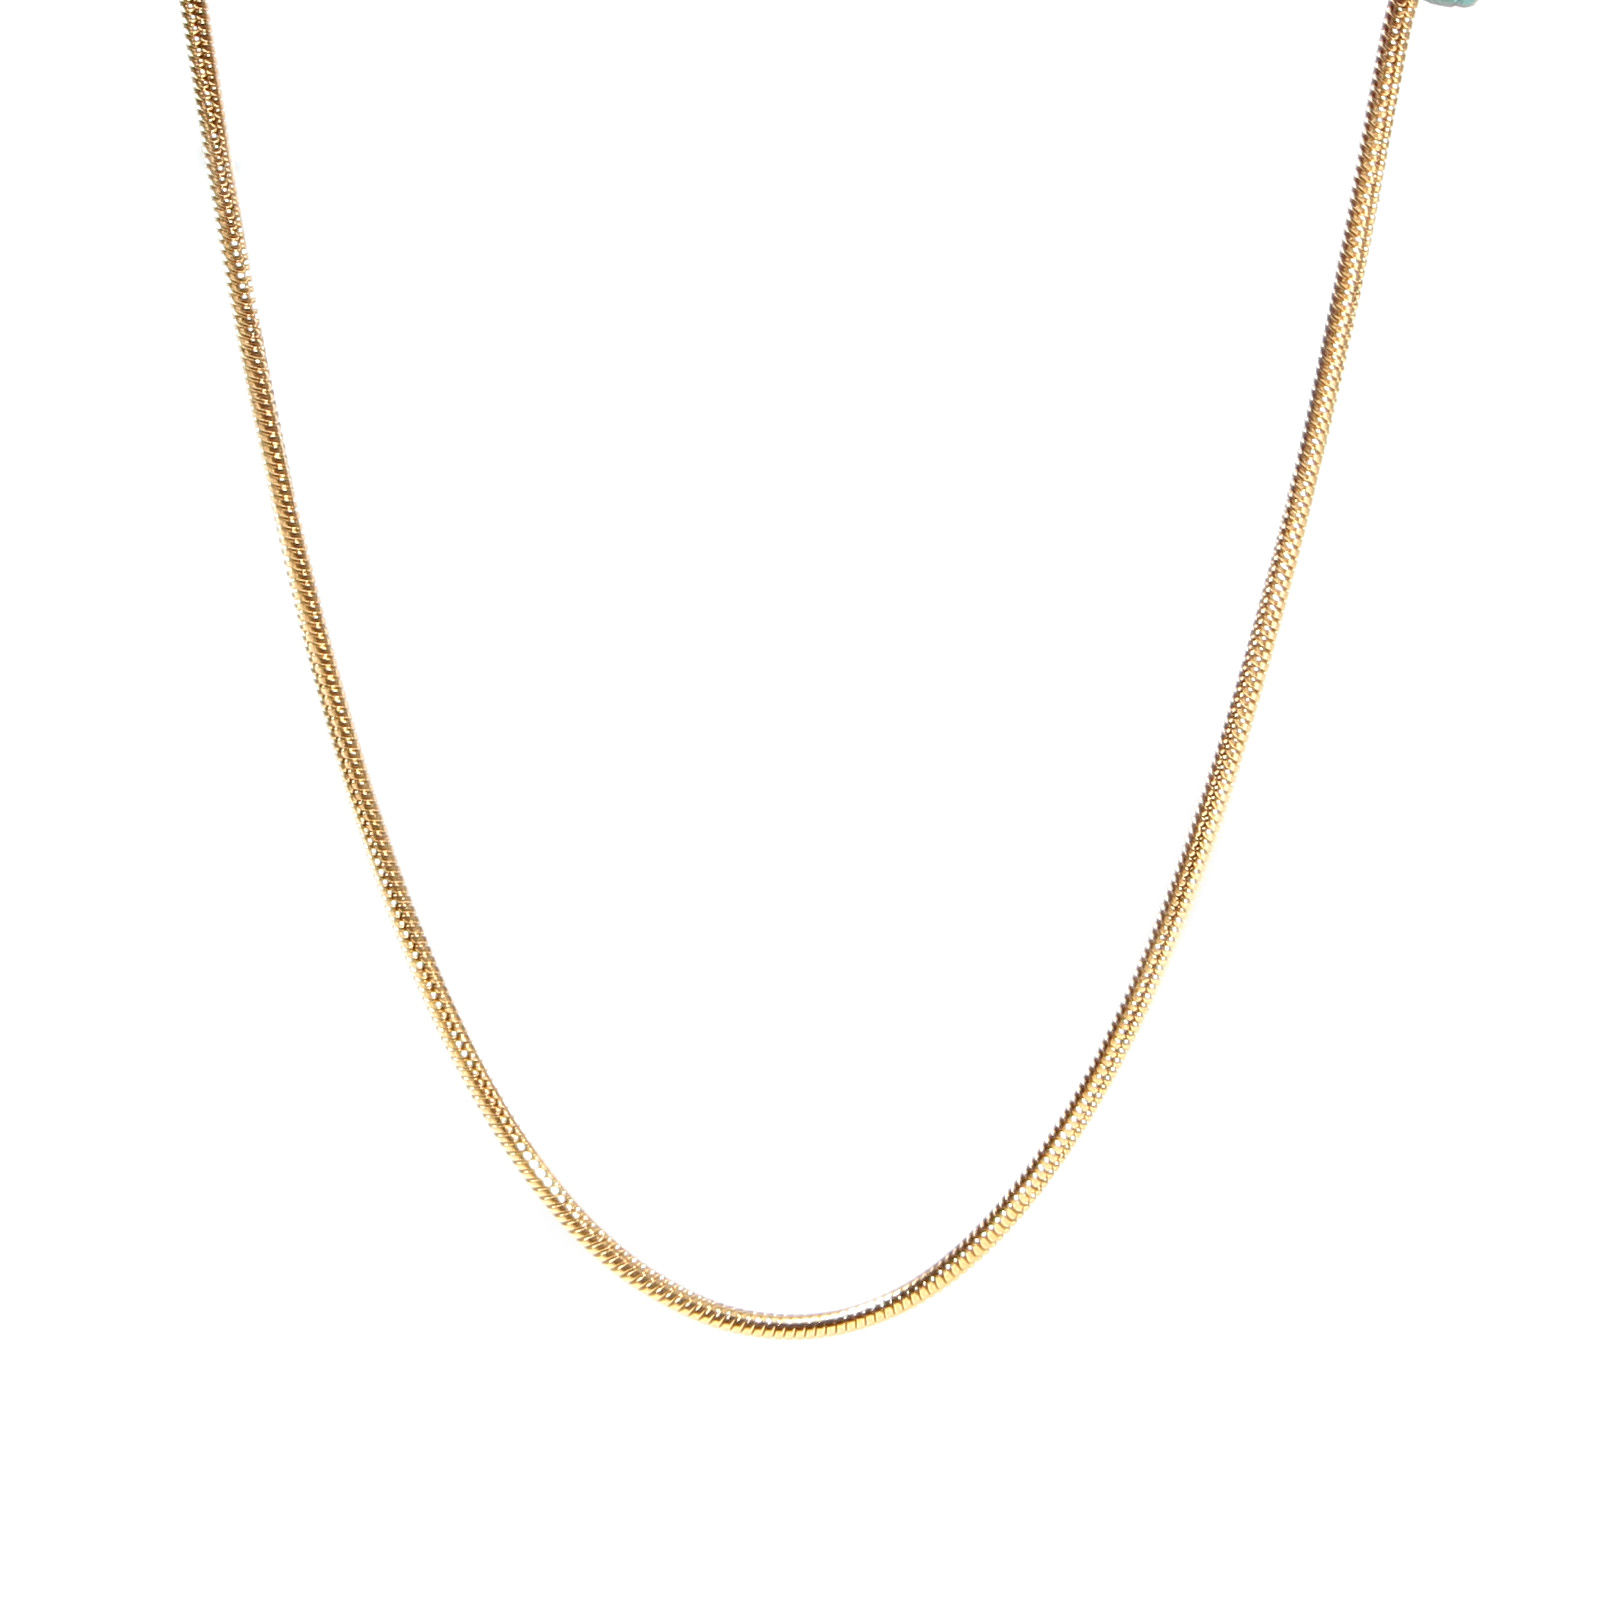 Picture of Stainless Steel Snake Chain Necklace Gold Plated 55cm(21 5/8") long, 1 Piece